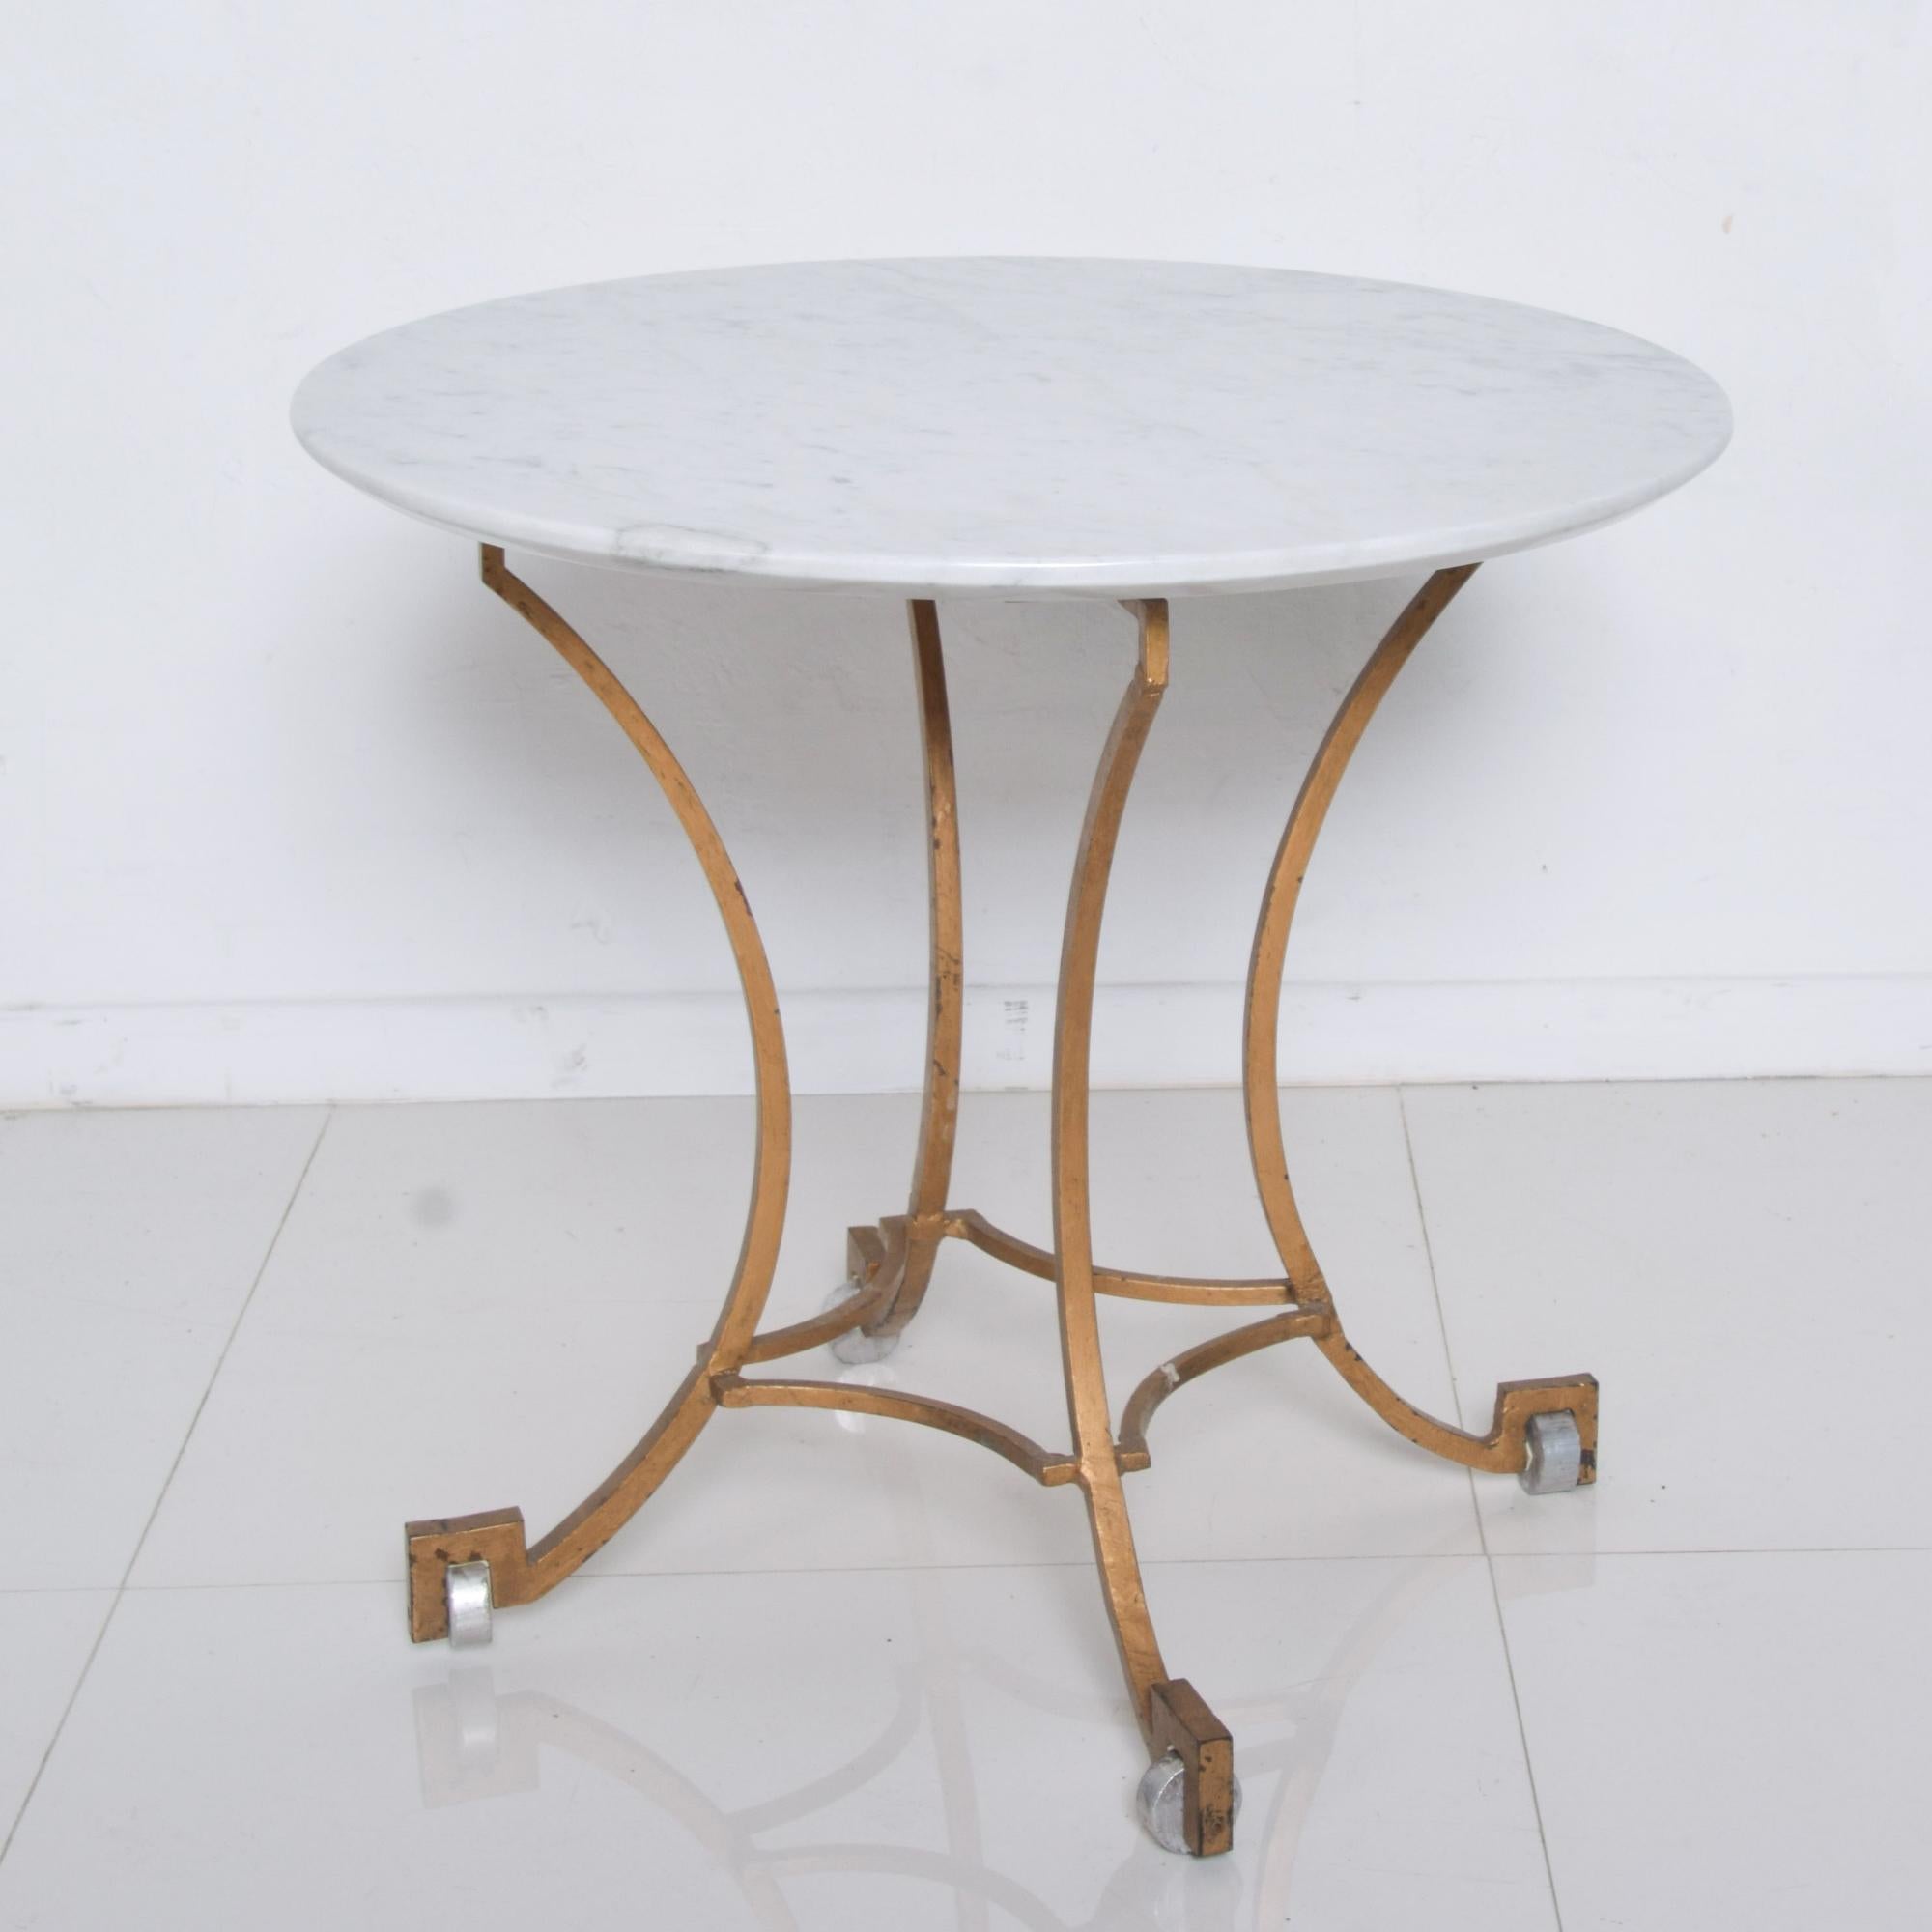 Midcentury 1960s Mexico by Talleres Chacon attributed to Arturo Pani: Round side table scalloped flared iron frame with gold gilt, new marble top beveled edge and standout silver aluminum fancy feet. Exceptional geometric angled design.
No label or